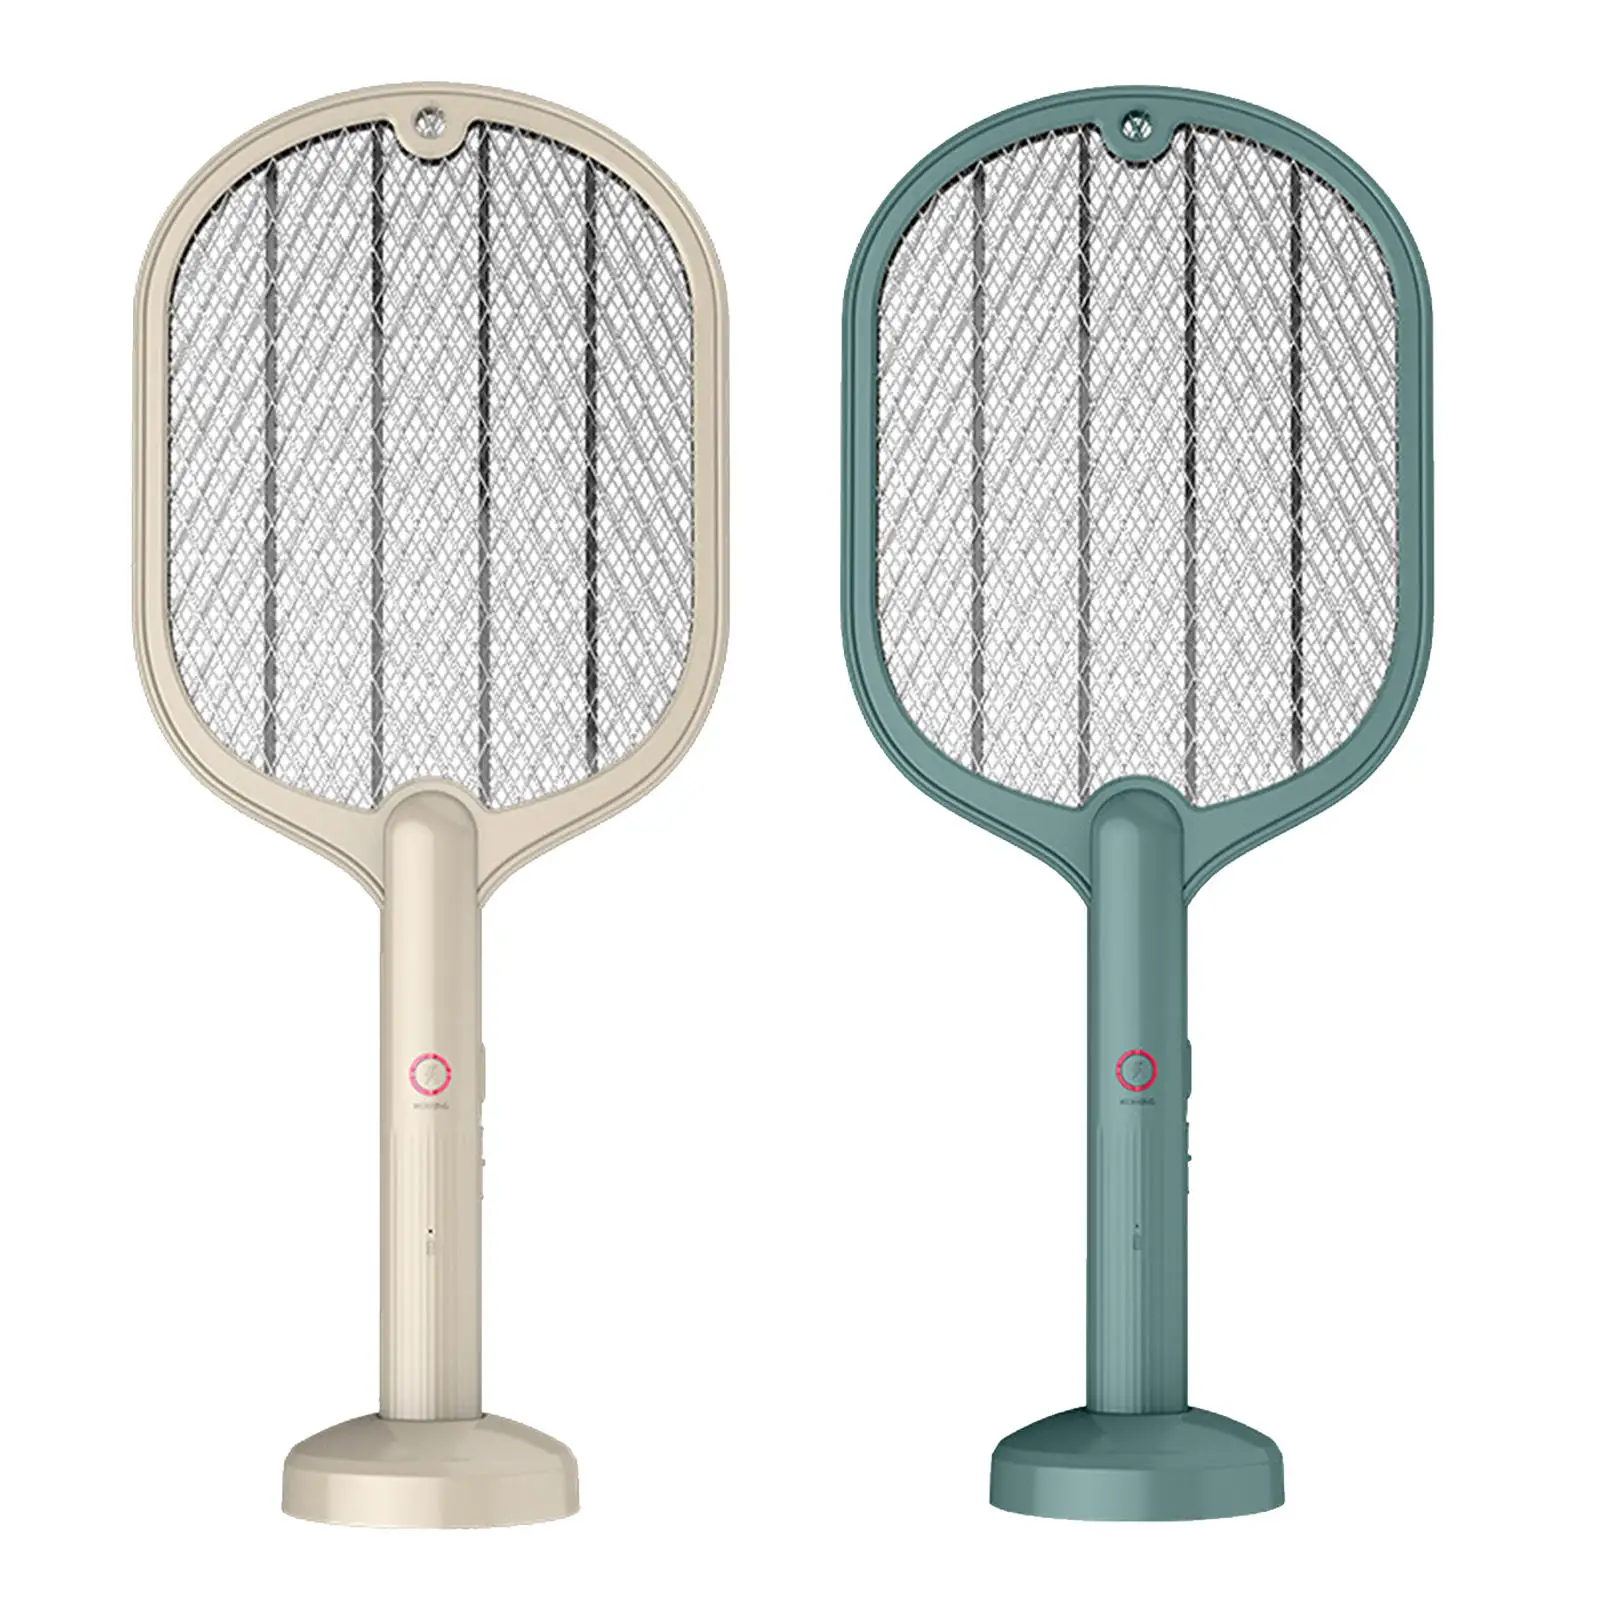 2-in-1 Electric Mosquito Swatter Rechargeable Handheld Wasp Fly Pest Insects Zapper Racket Control